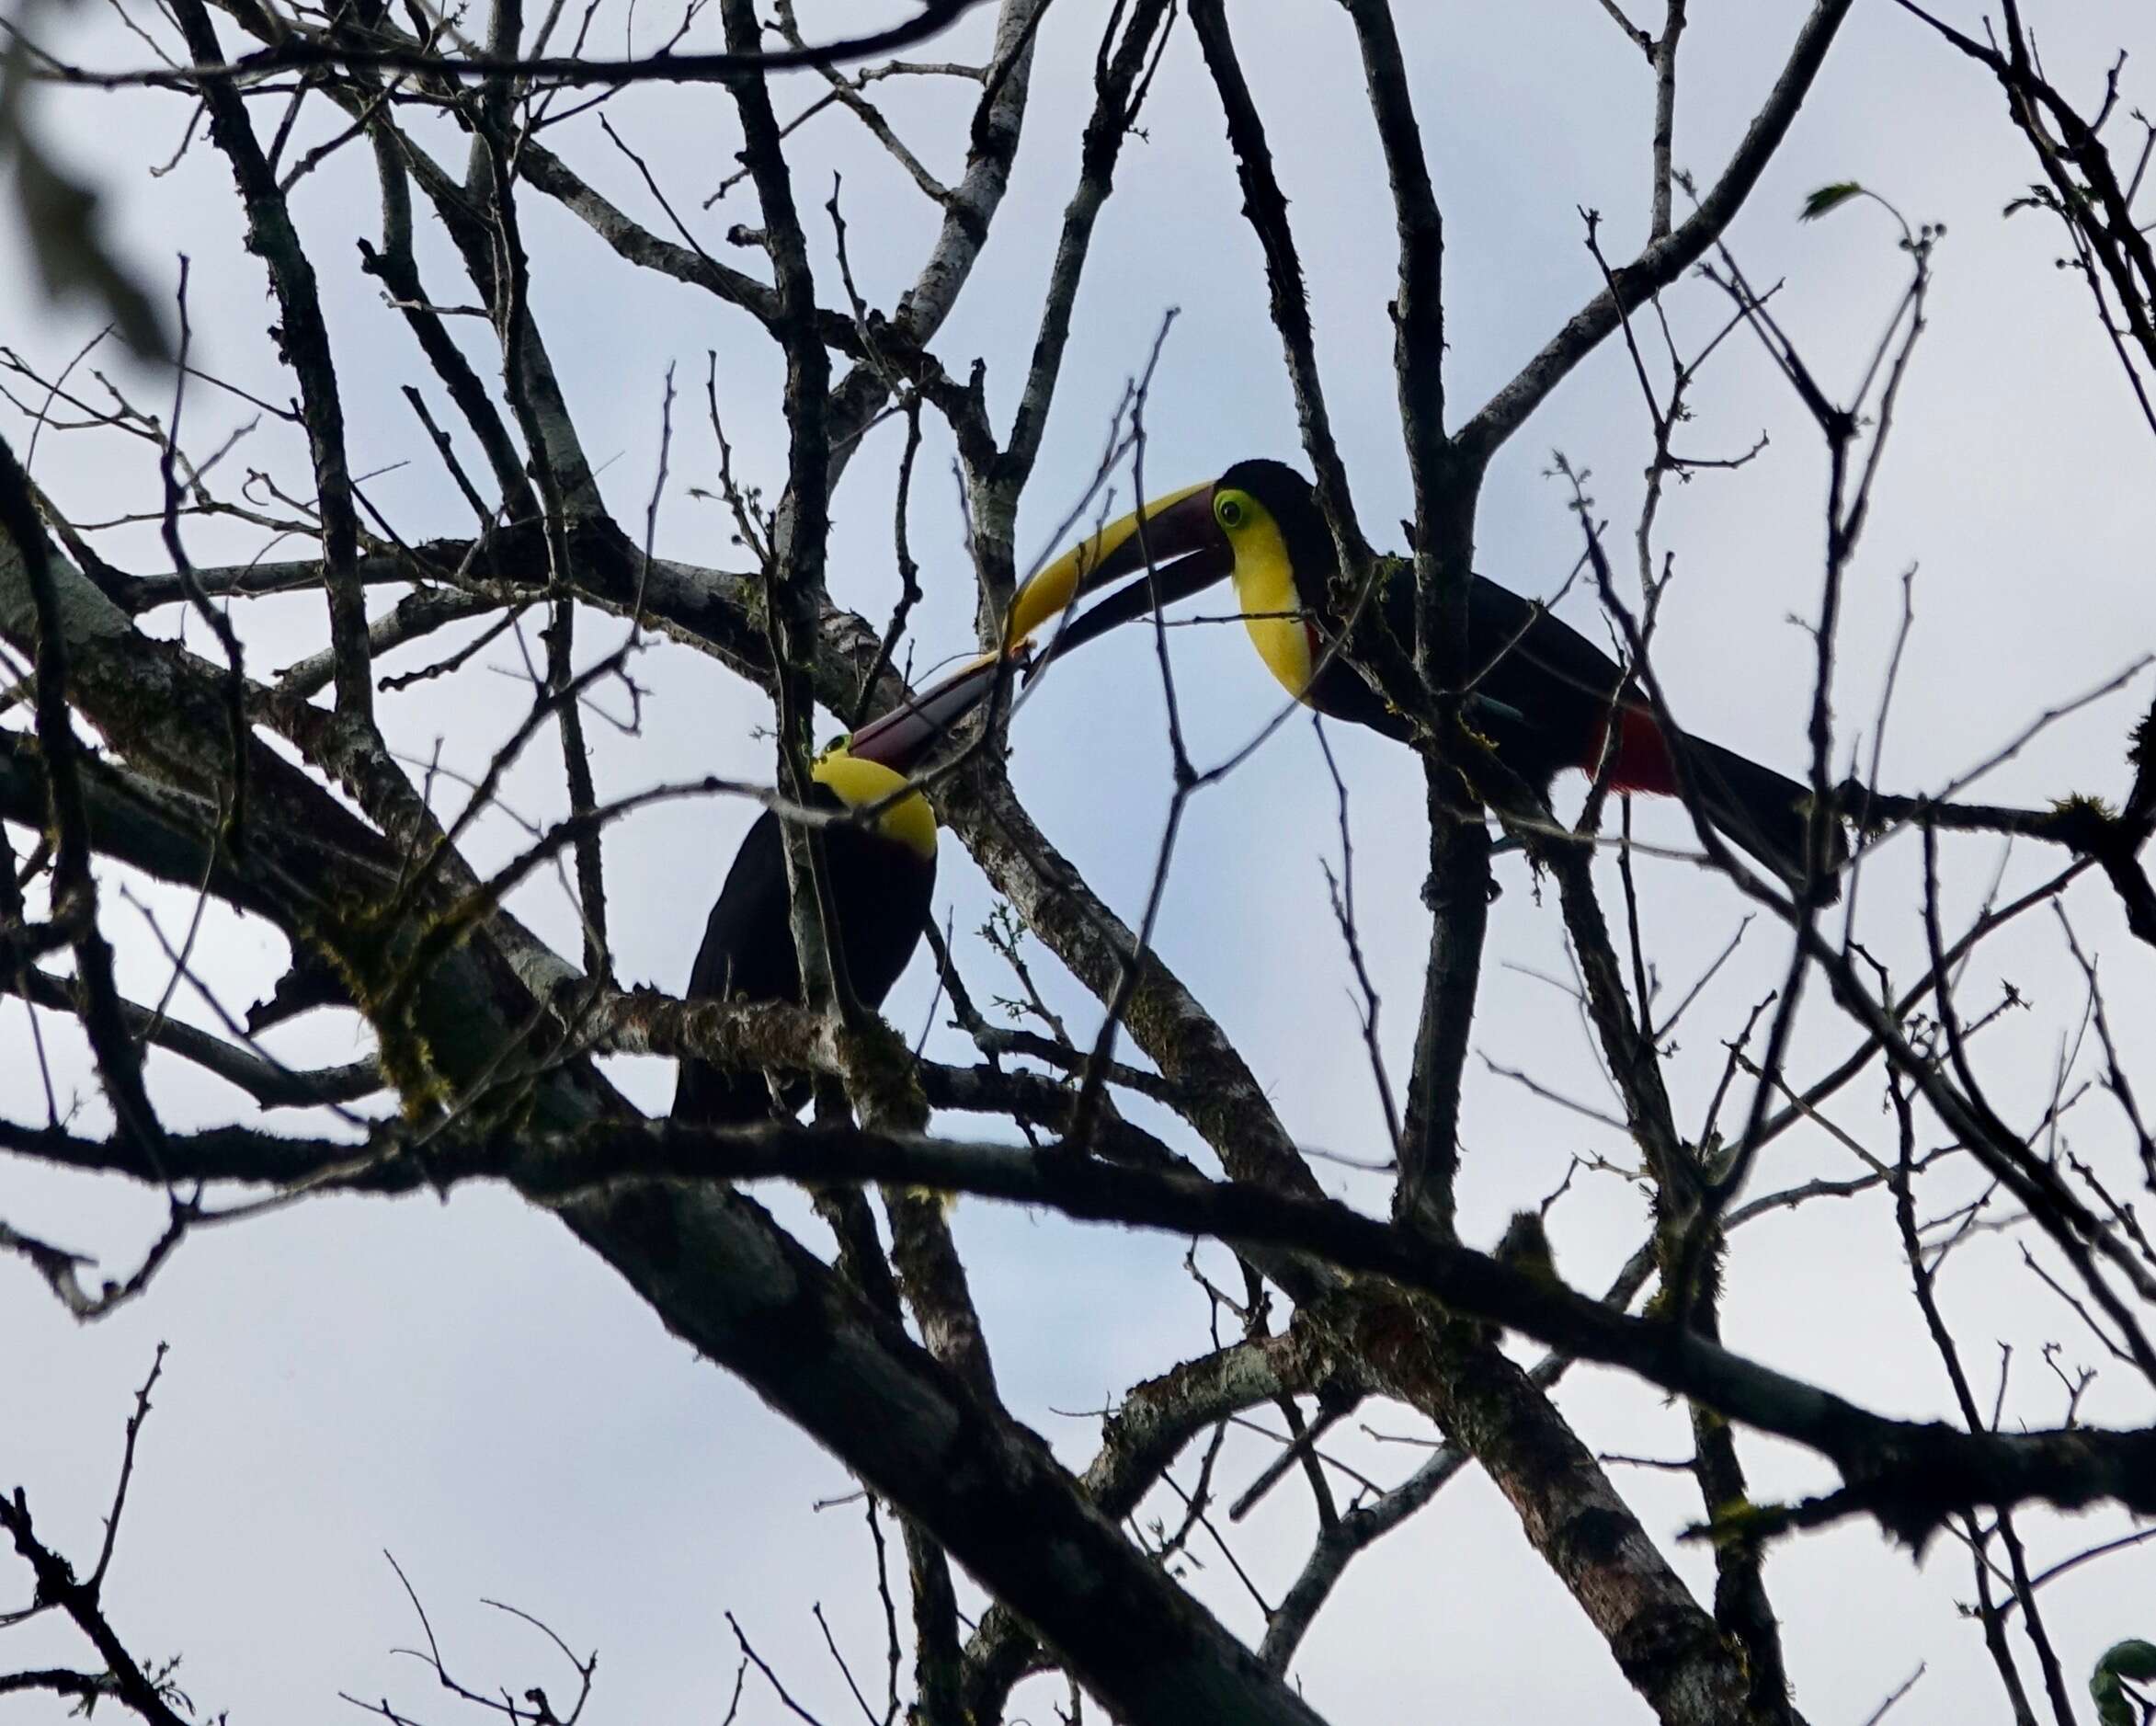 Image of Chestnut-mandibled Toucan